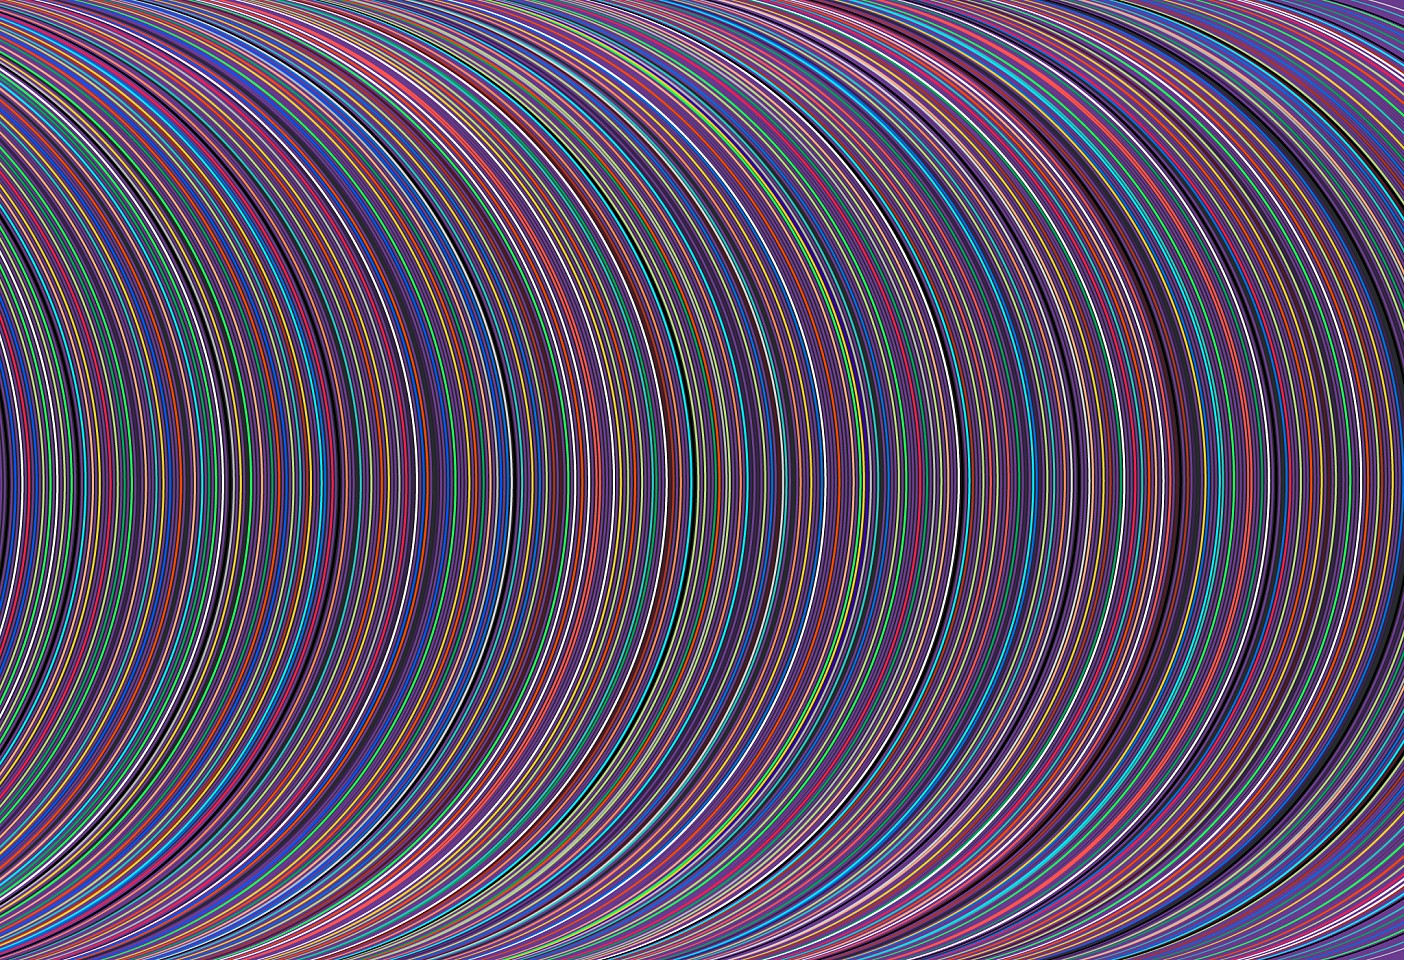 Dane Albert, Arcs #9 Night, 2023
Acrylic on canvas (Concept), 48 x 72 in. (121.9 x 182.9 cm)
Series of colored lines and shapes in multiple configurations
DA.2023.arcs-009-night